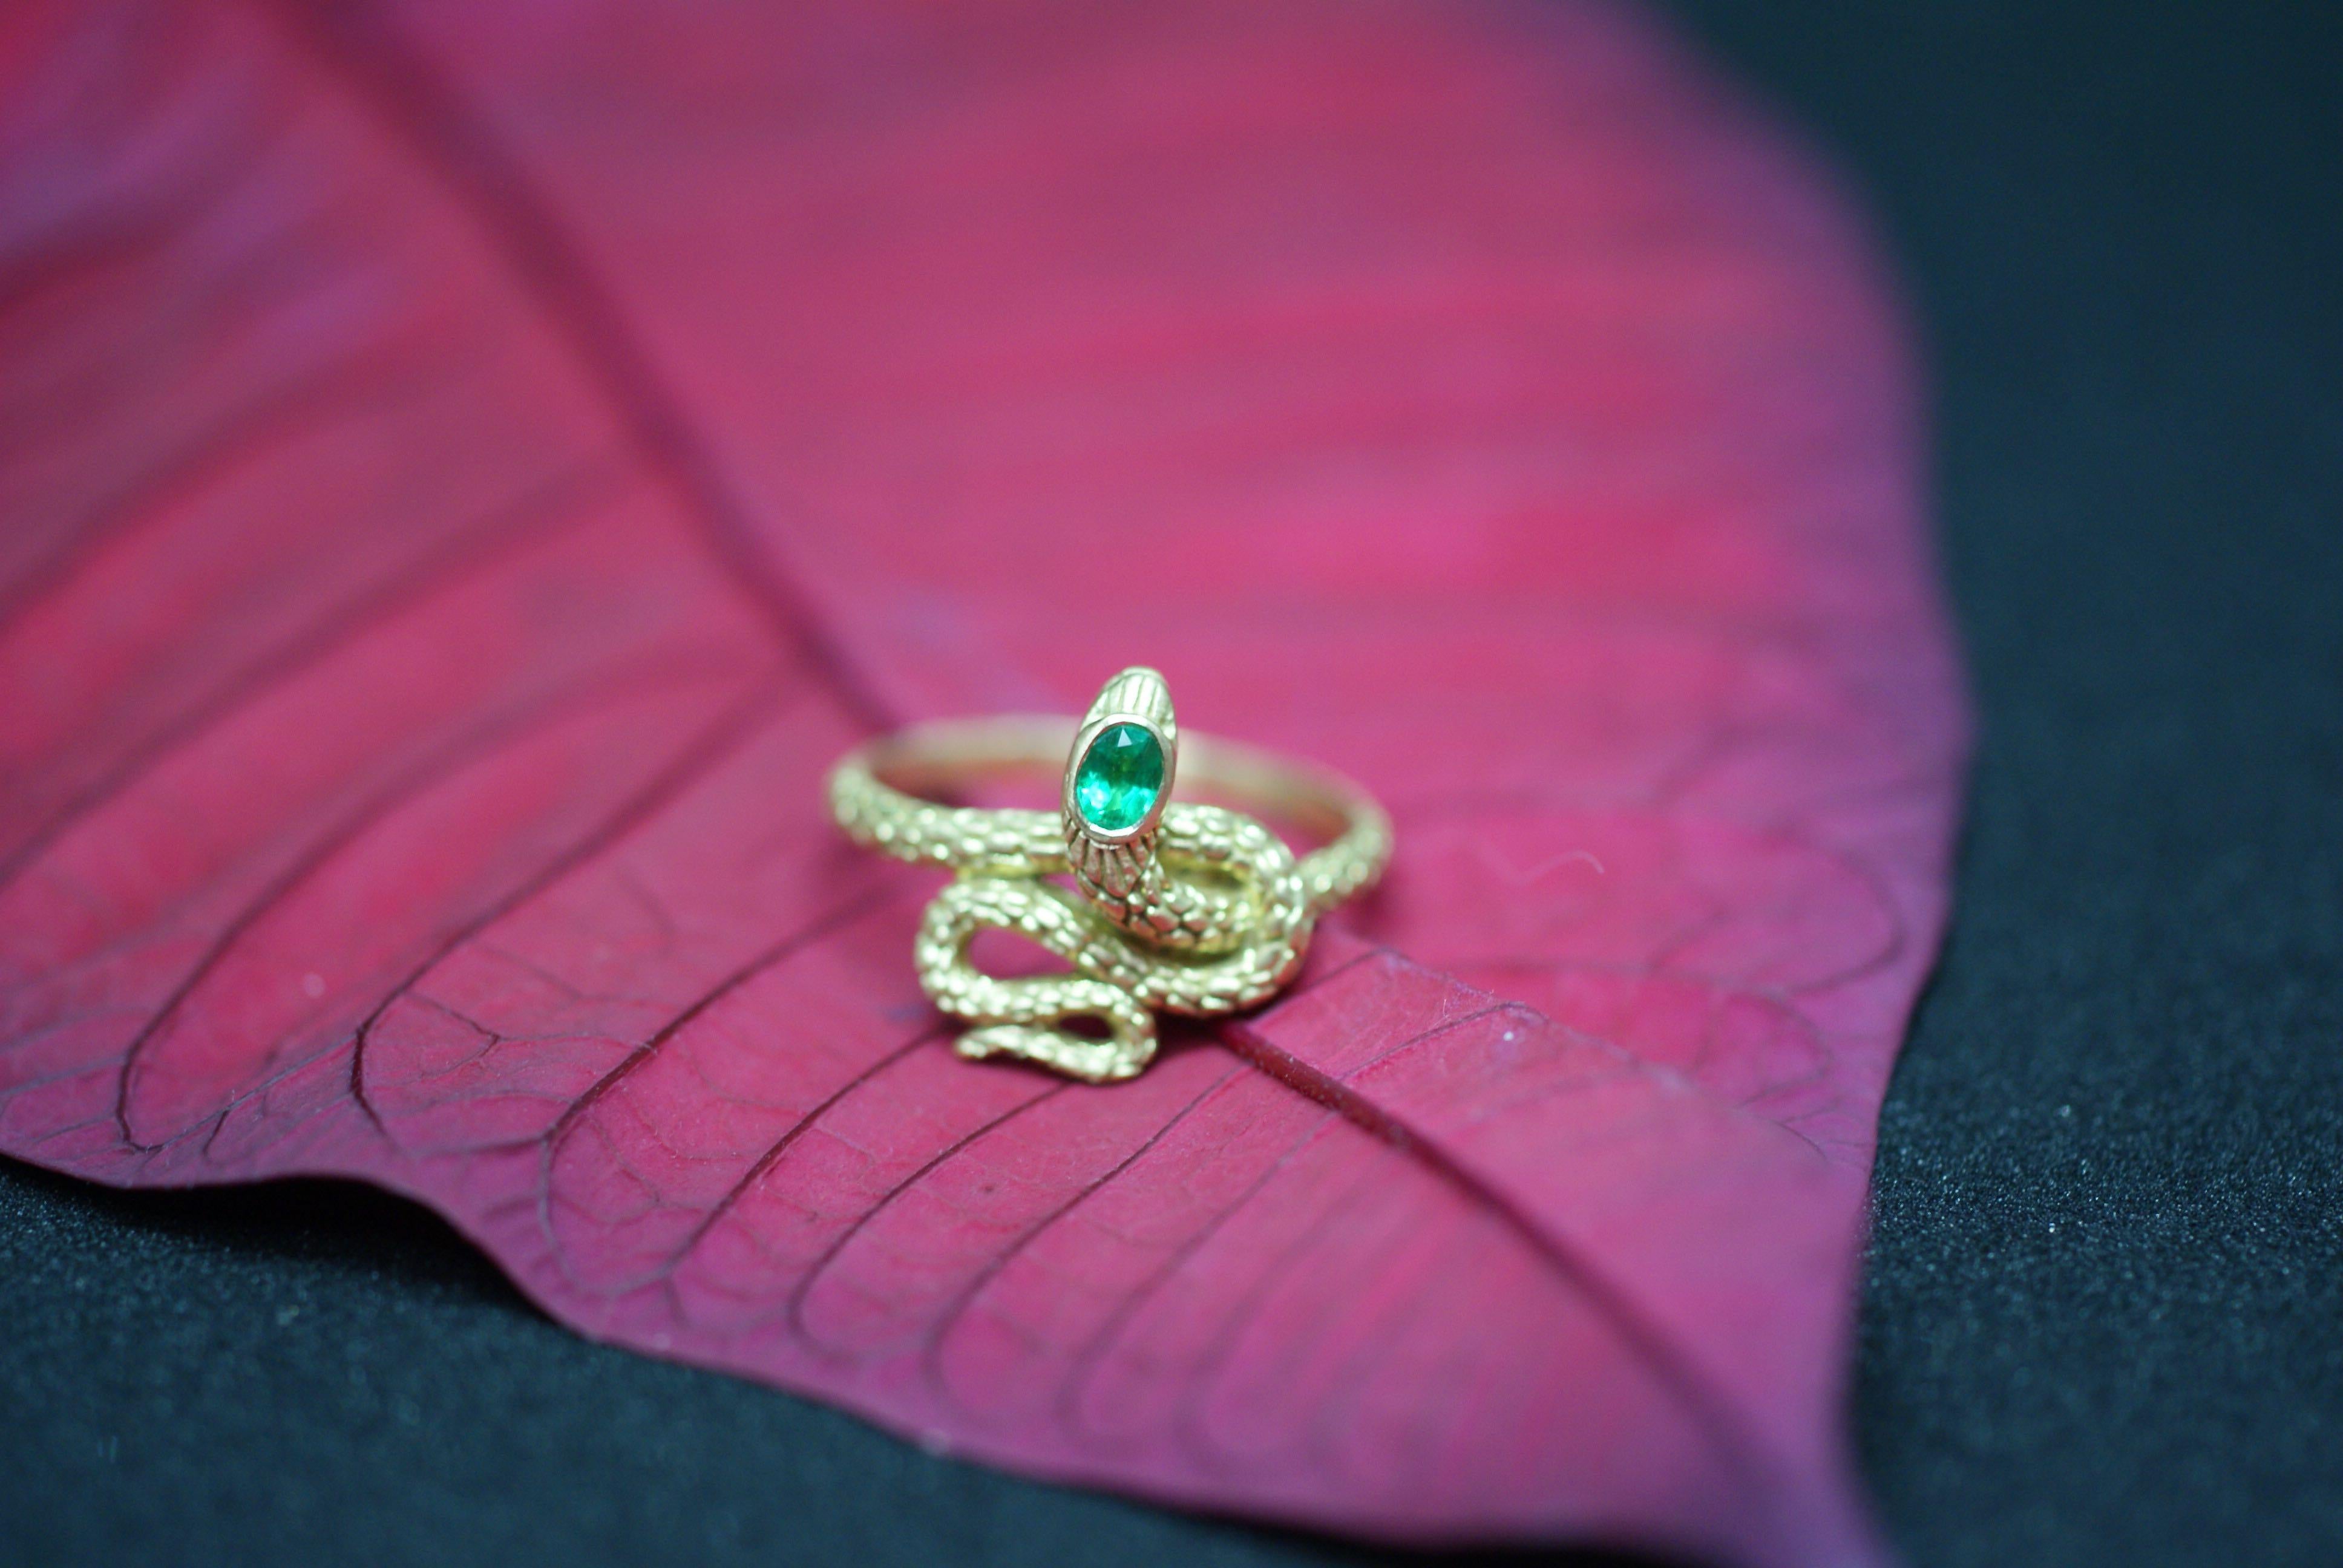 Serpents have historically been used as symbols of protection. Think of all the imagery of serpents guarding treasures. This charming ring is set with an oval-cut emerald in the head of the serpent and is manufactured in 18K gold. This ring is 100%